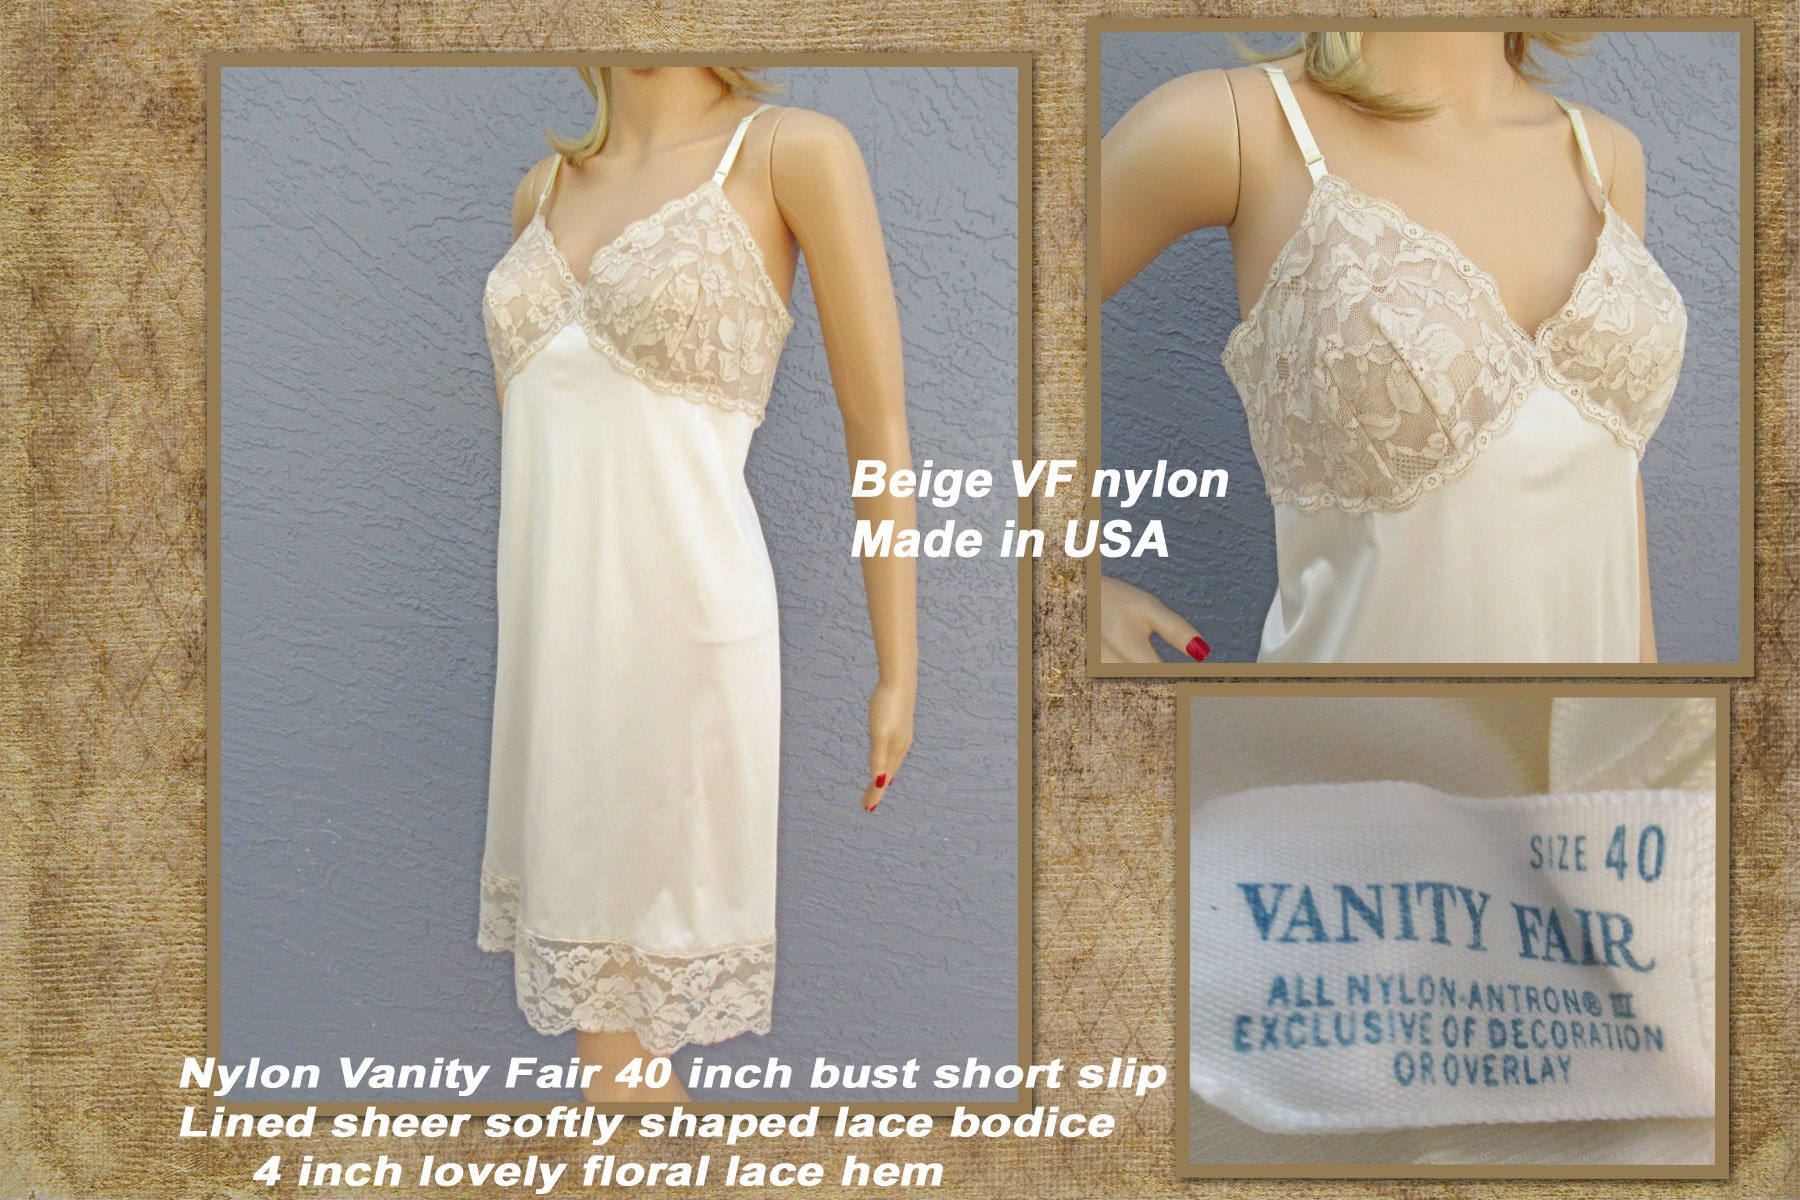 Vanity Fair 40 Inch Bust Short Slip, Nylon Lined Sheer Softly Shaped Lace  Bodice, 4 Inch Lovely Floral Lace Hem, Beige, Made in USA, Vintage -   Canada